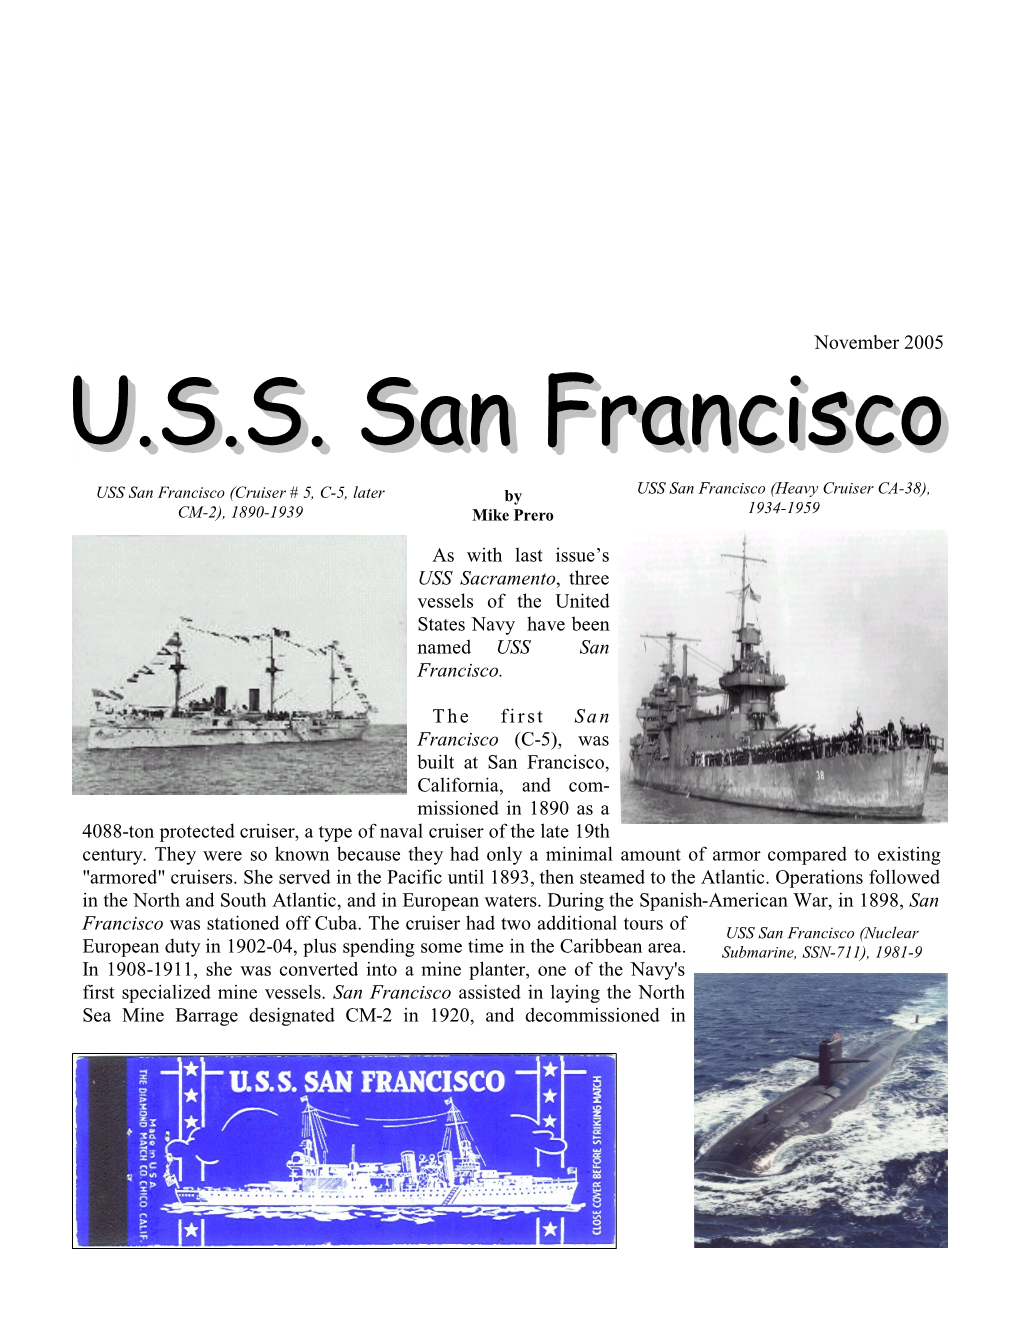 As with Last Issue's USS Sacramento, Three Vessels of the United States